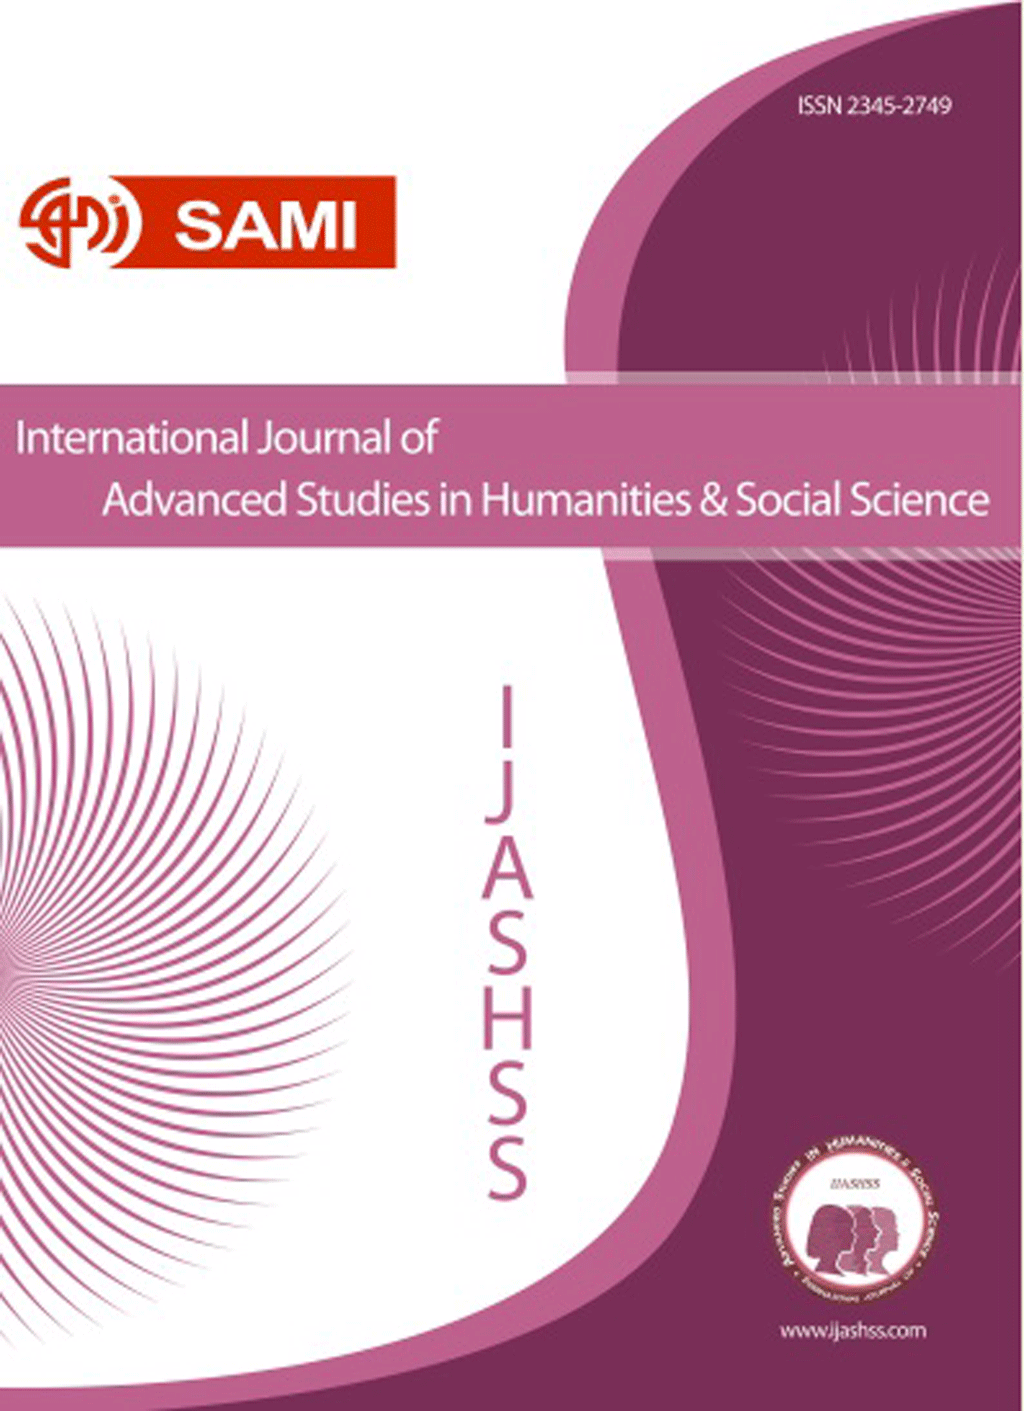 International Journal of Advanced Studies in Humanities and Social Science - October 2014, Volume 3 -  Issue 4